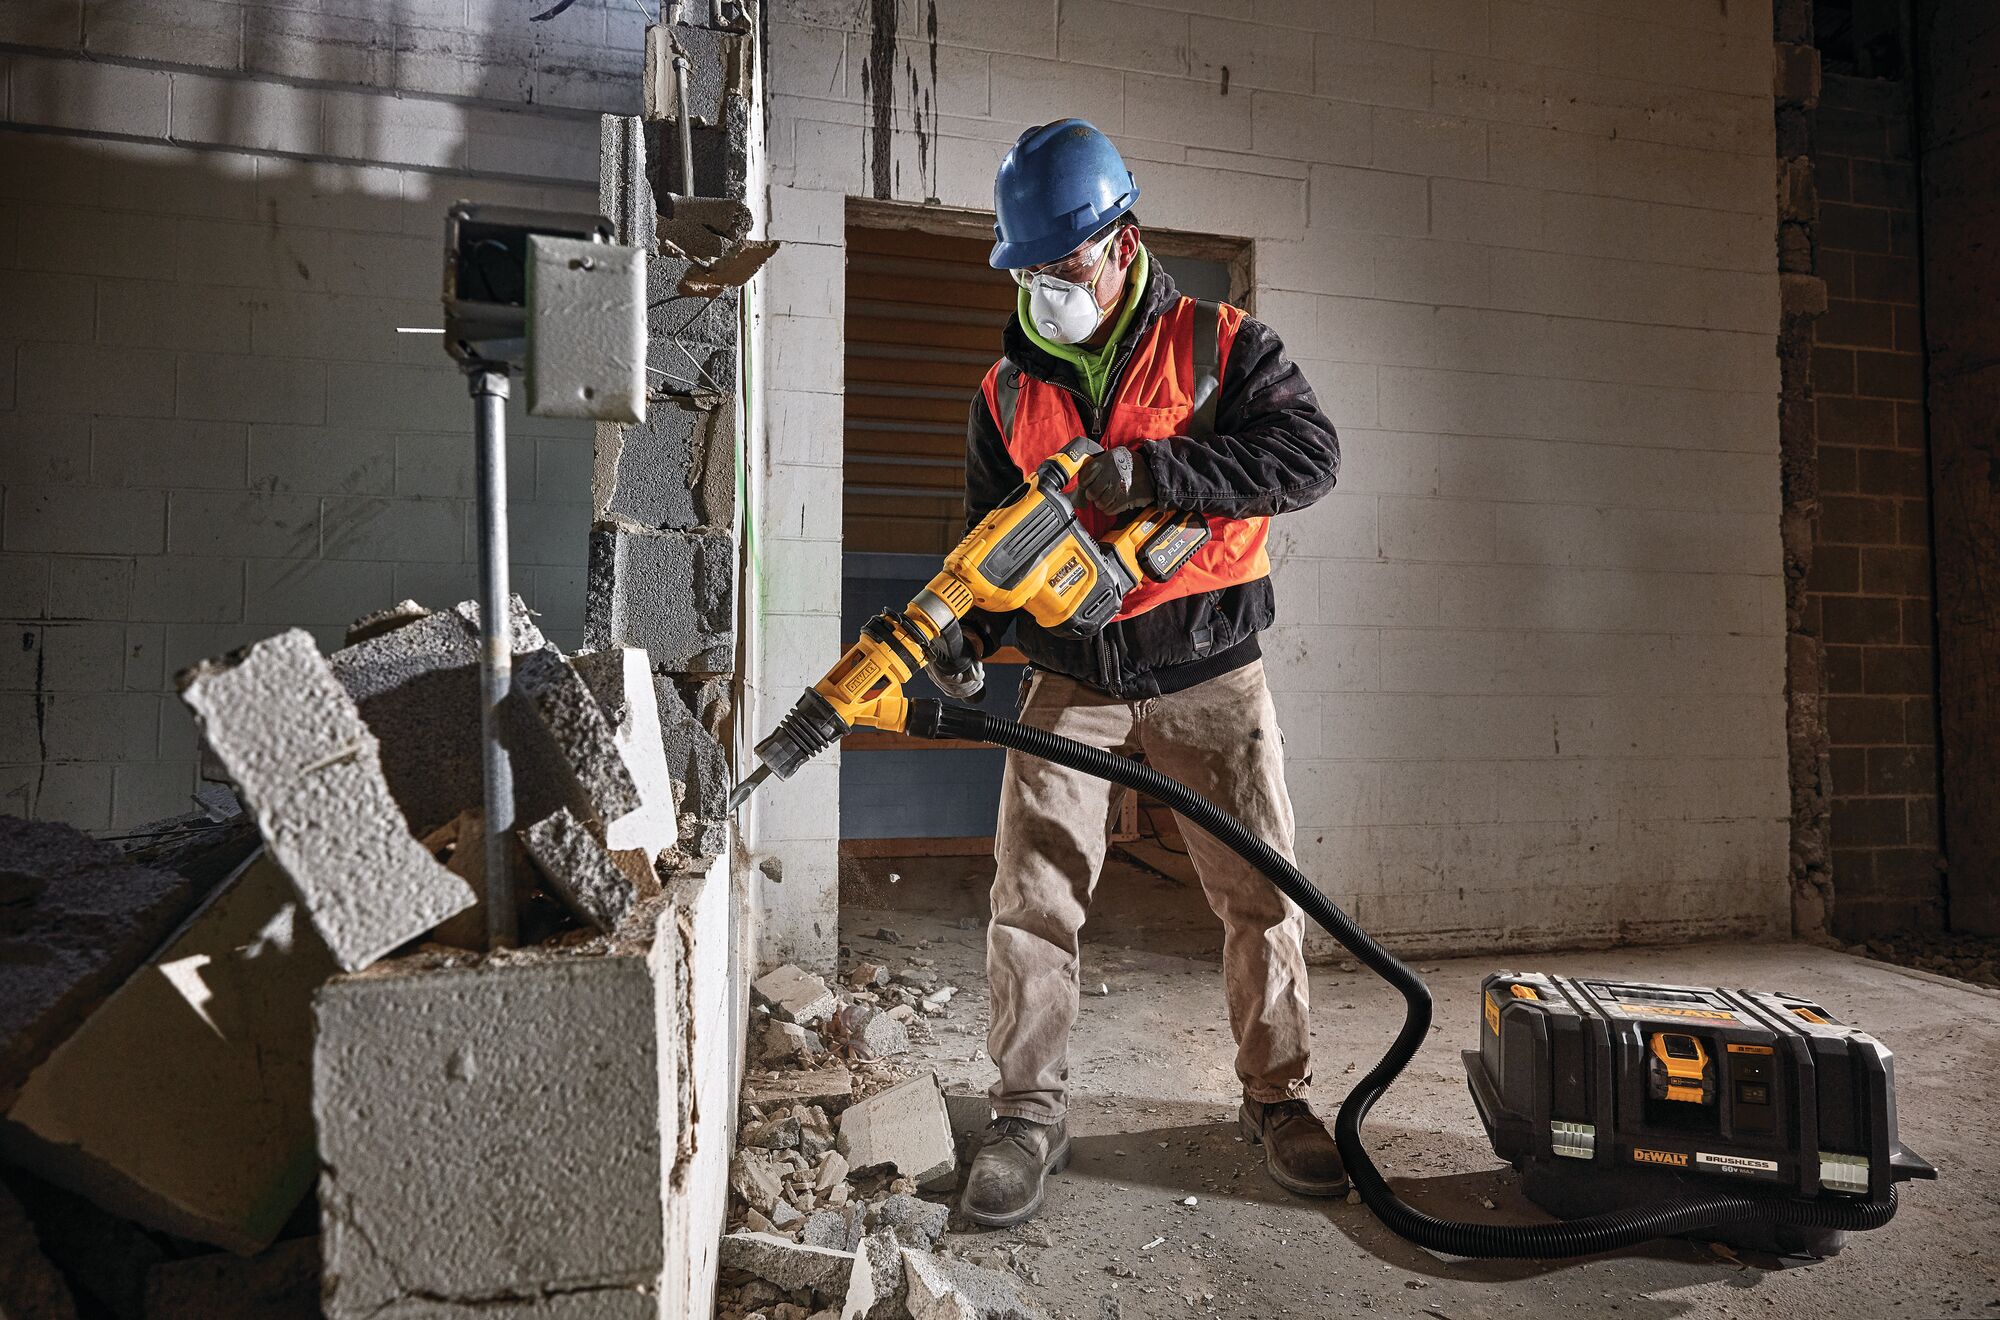 Demolition hammer dust shroud chiseling being used by a person to chisel.